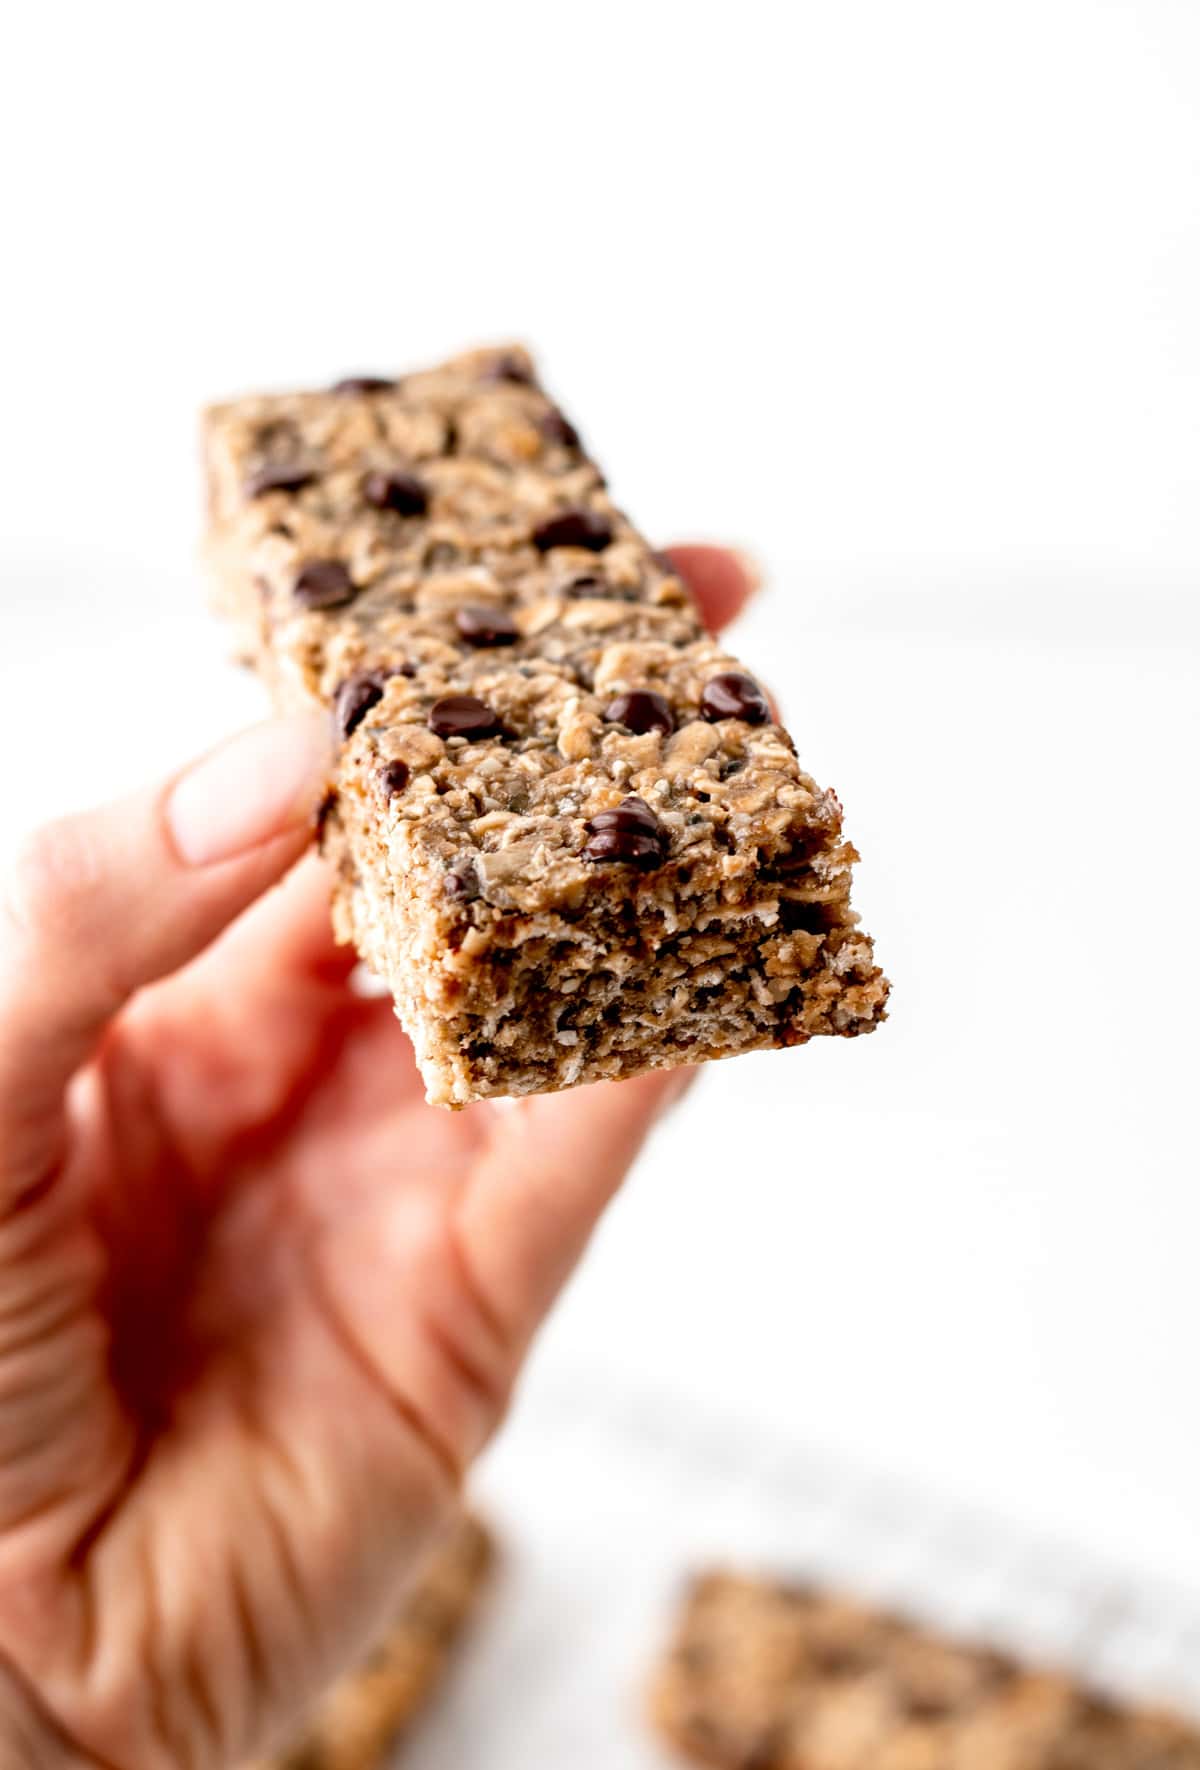 A close-up of someone holding a nut free breakfast bar in their hand.